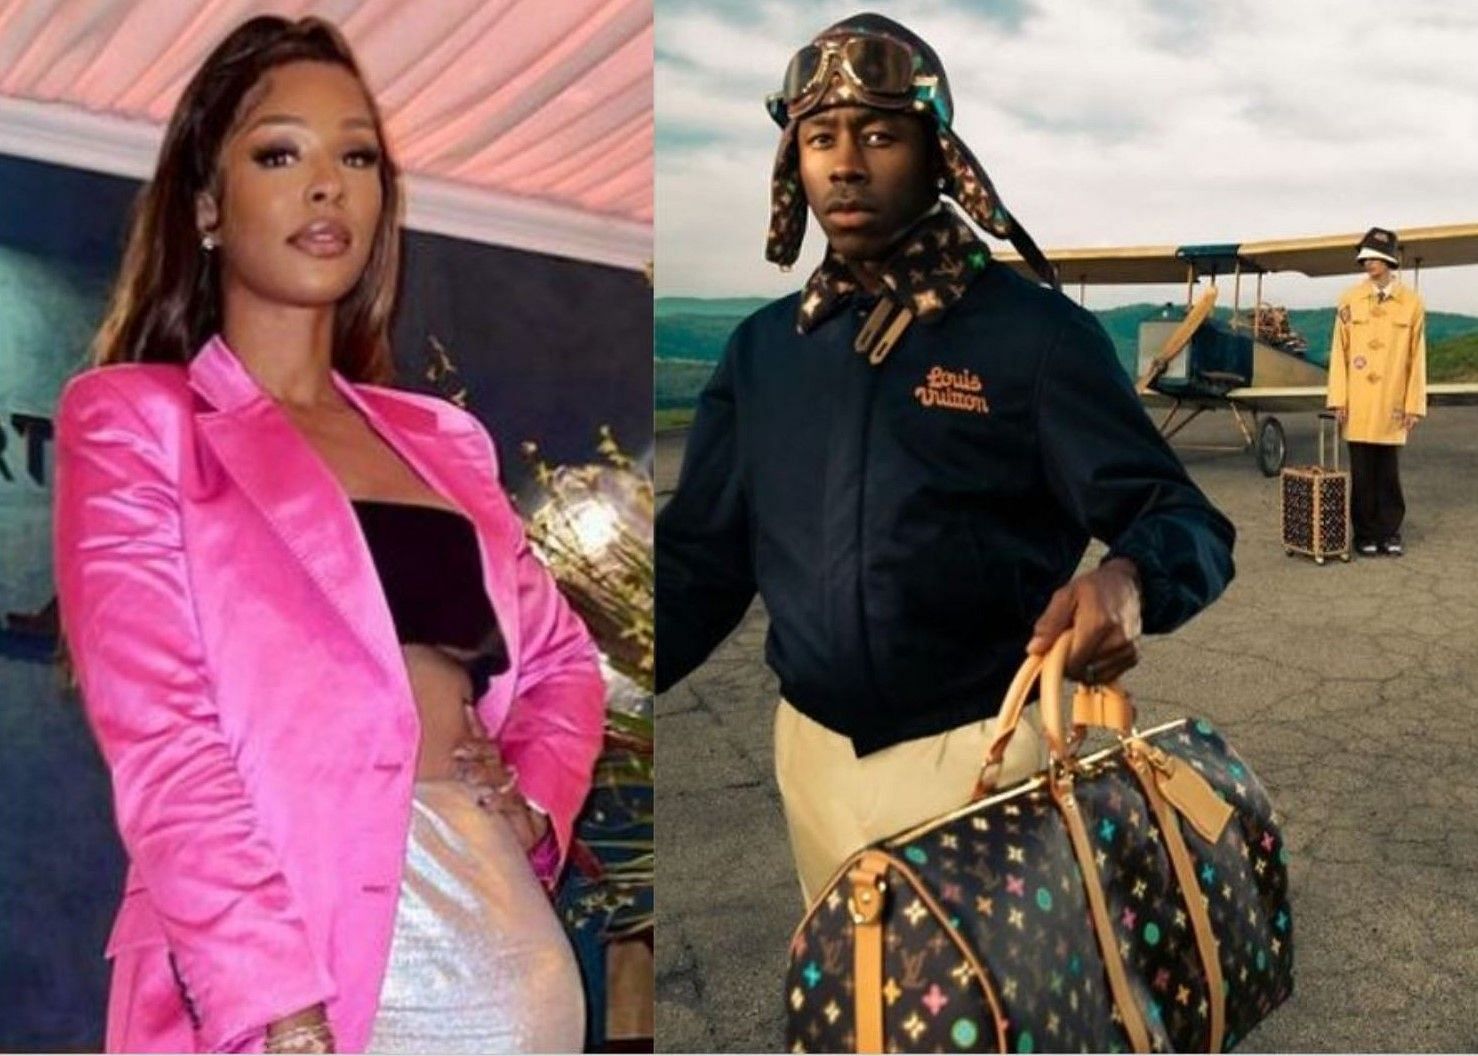 Savannah James (L) gave a shoutout to her friend Tyler, the Creator (R) for his latest collaboration with Louis Vuitton.